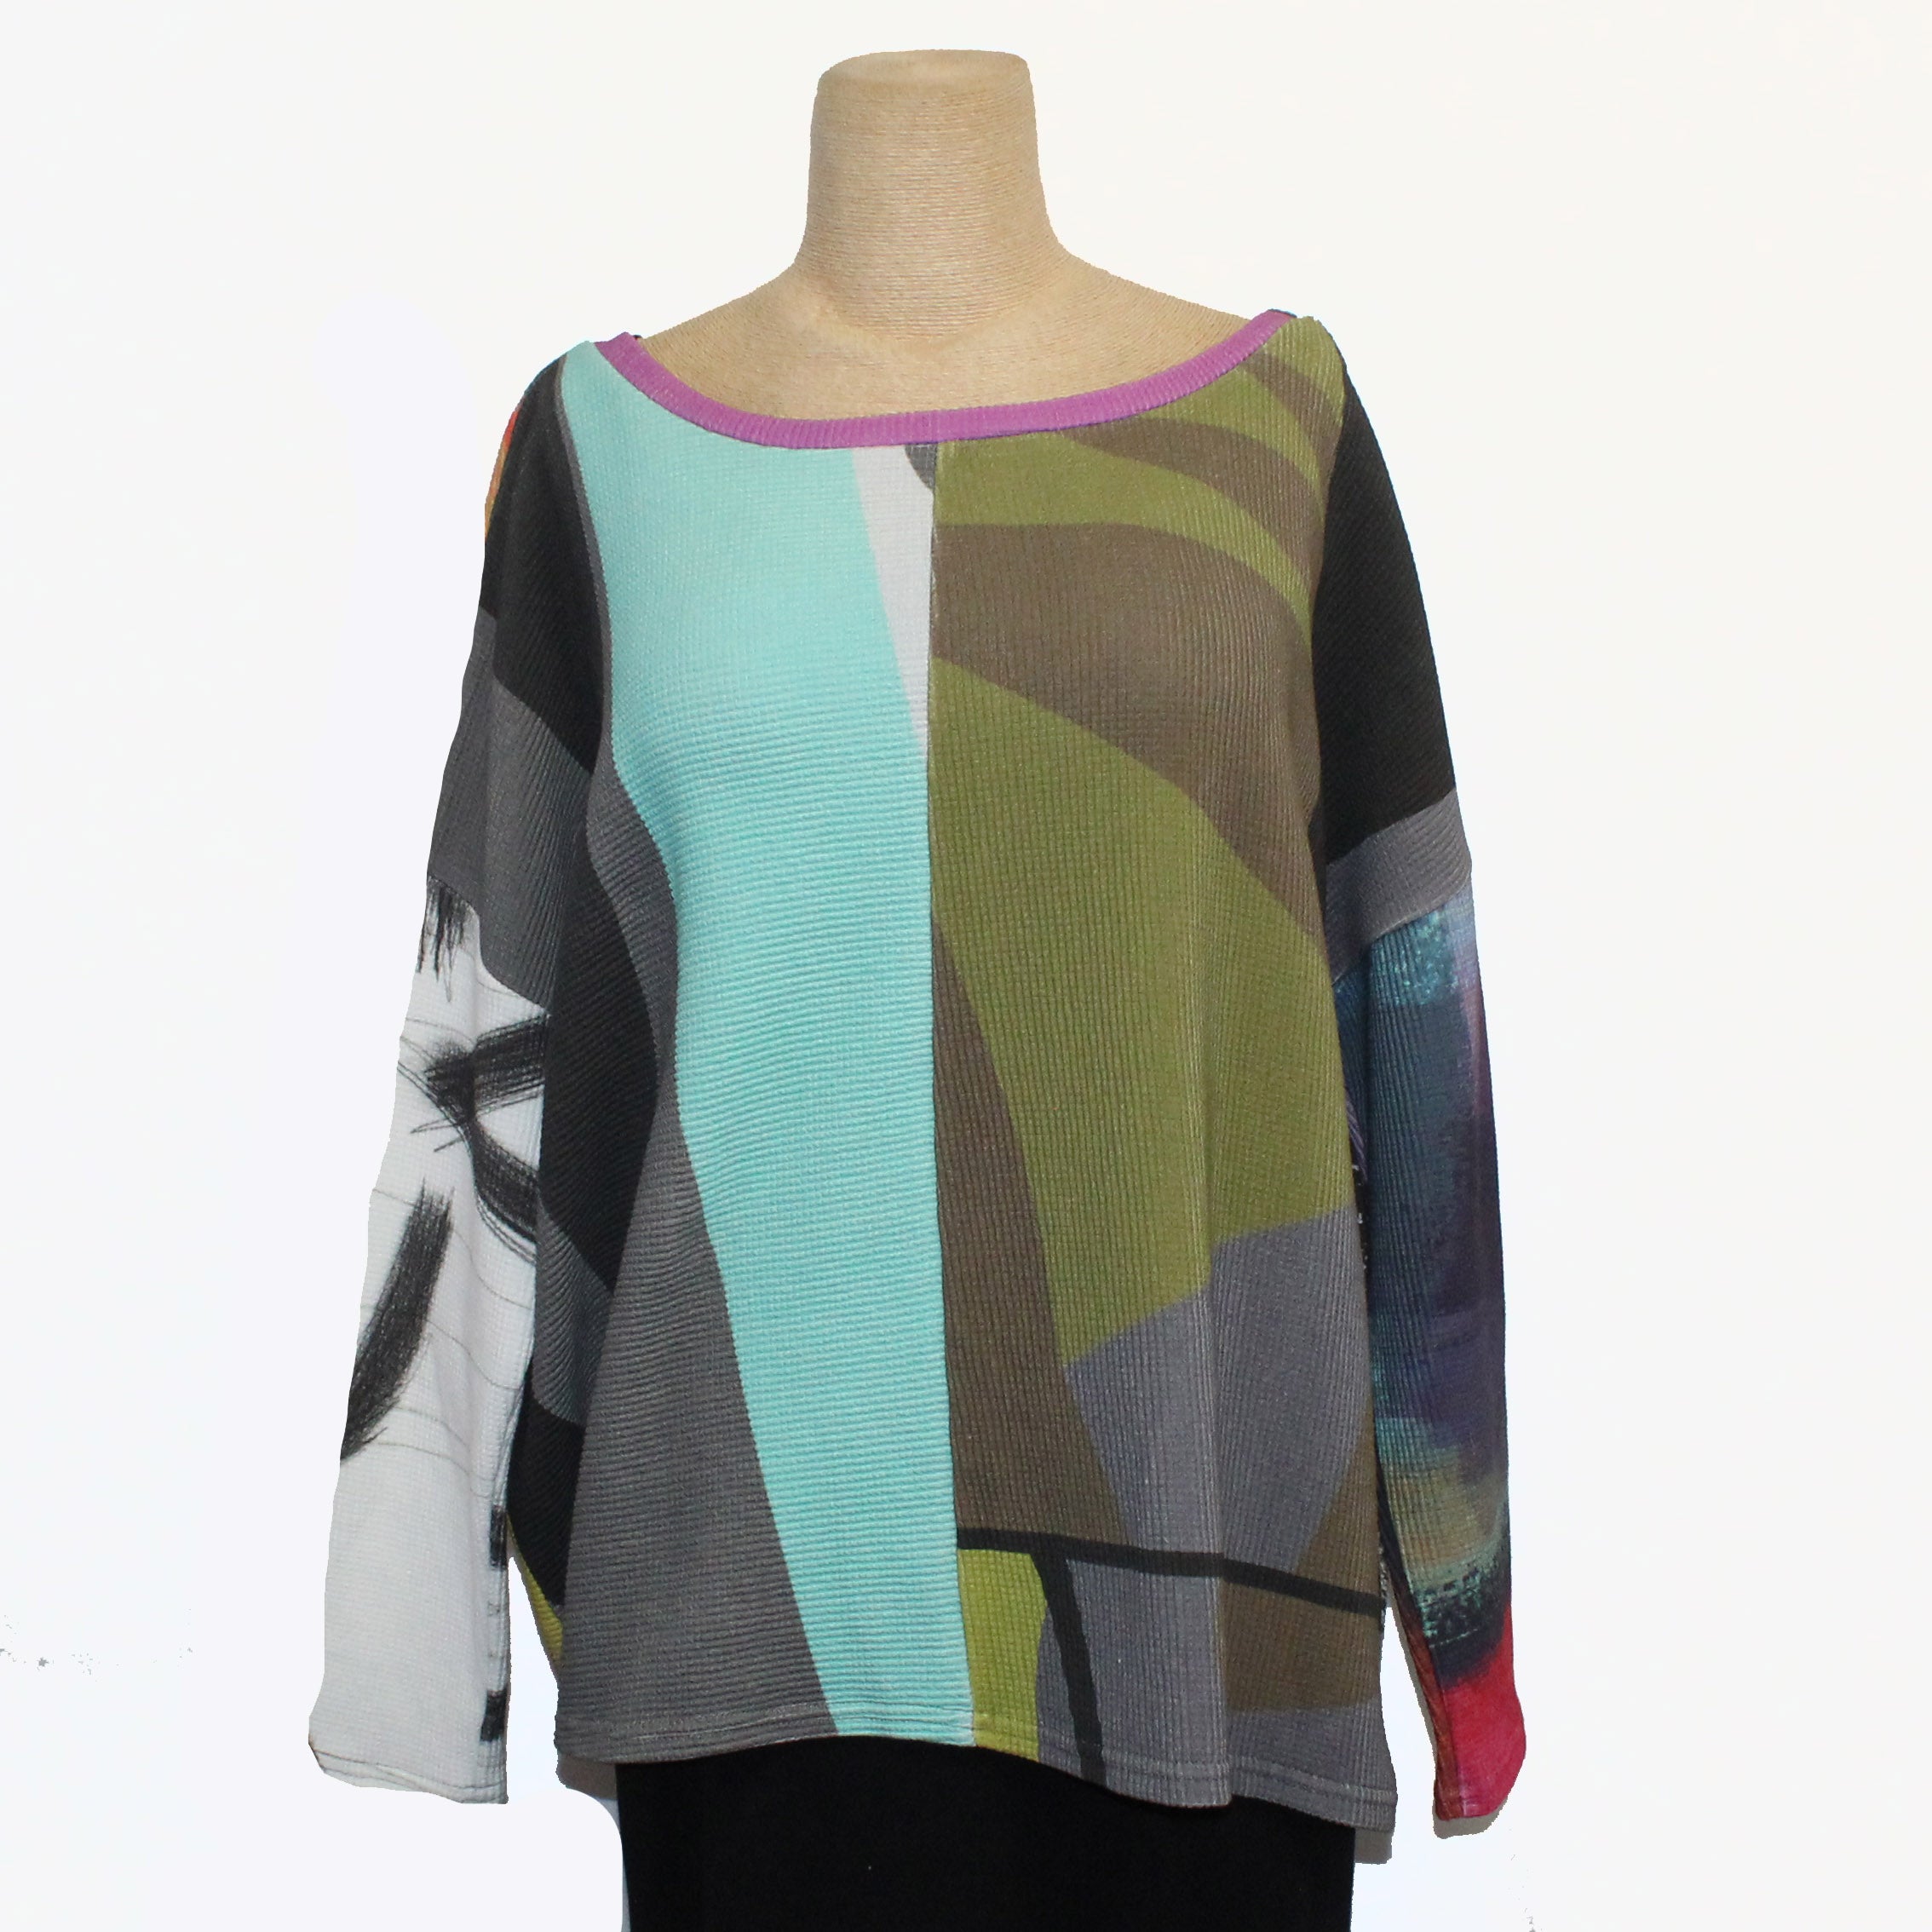 Andrea Geer Boxy Top, Reversible, Multi-Color, M/L, #2